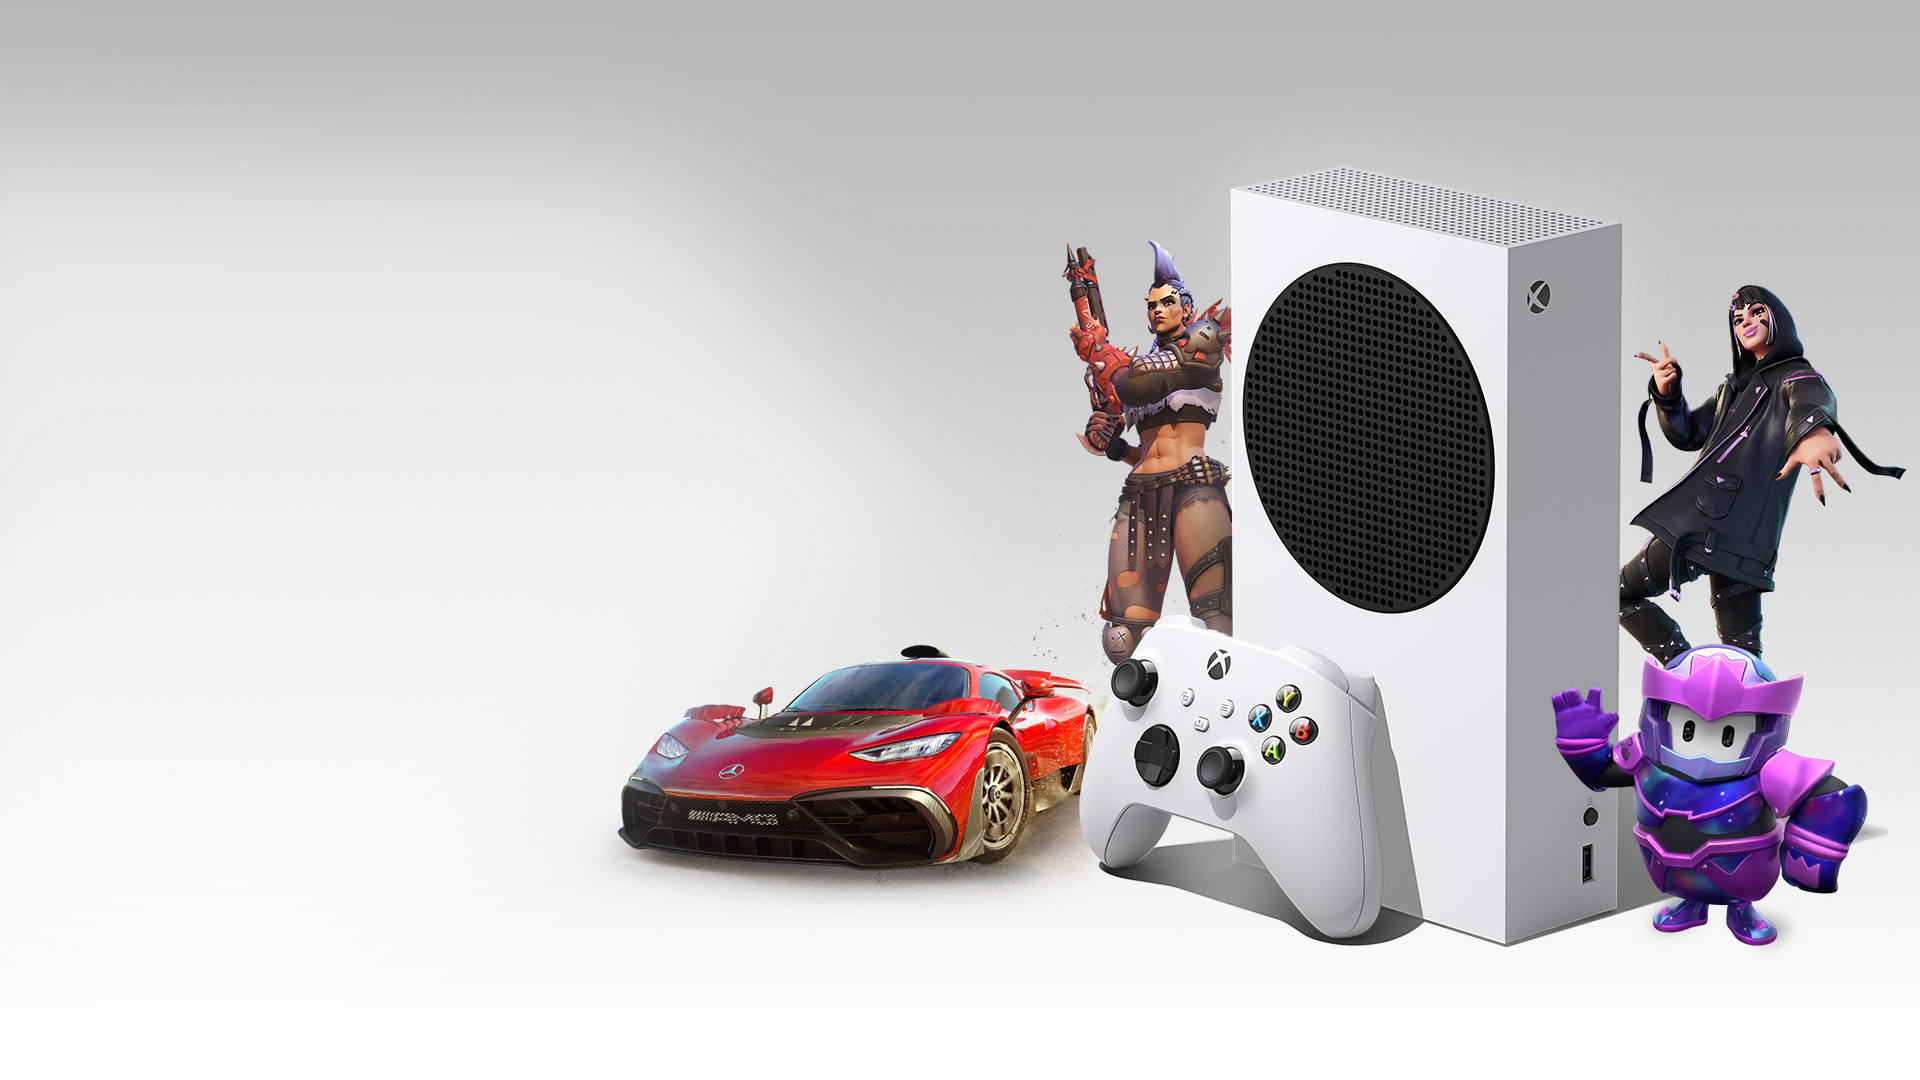 An Xbox Series S surrounded by characters from Overwatch 2, Fortnite, Fall Guys, and the Mercedes-AMG One from Forza Horizon 5.